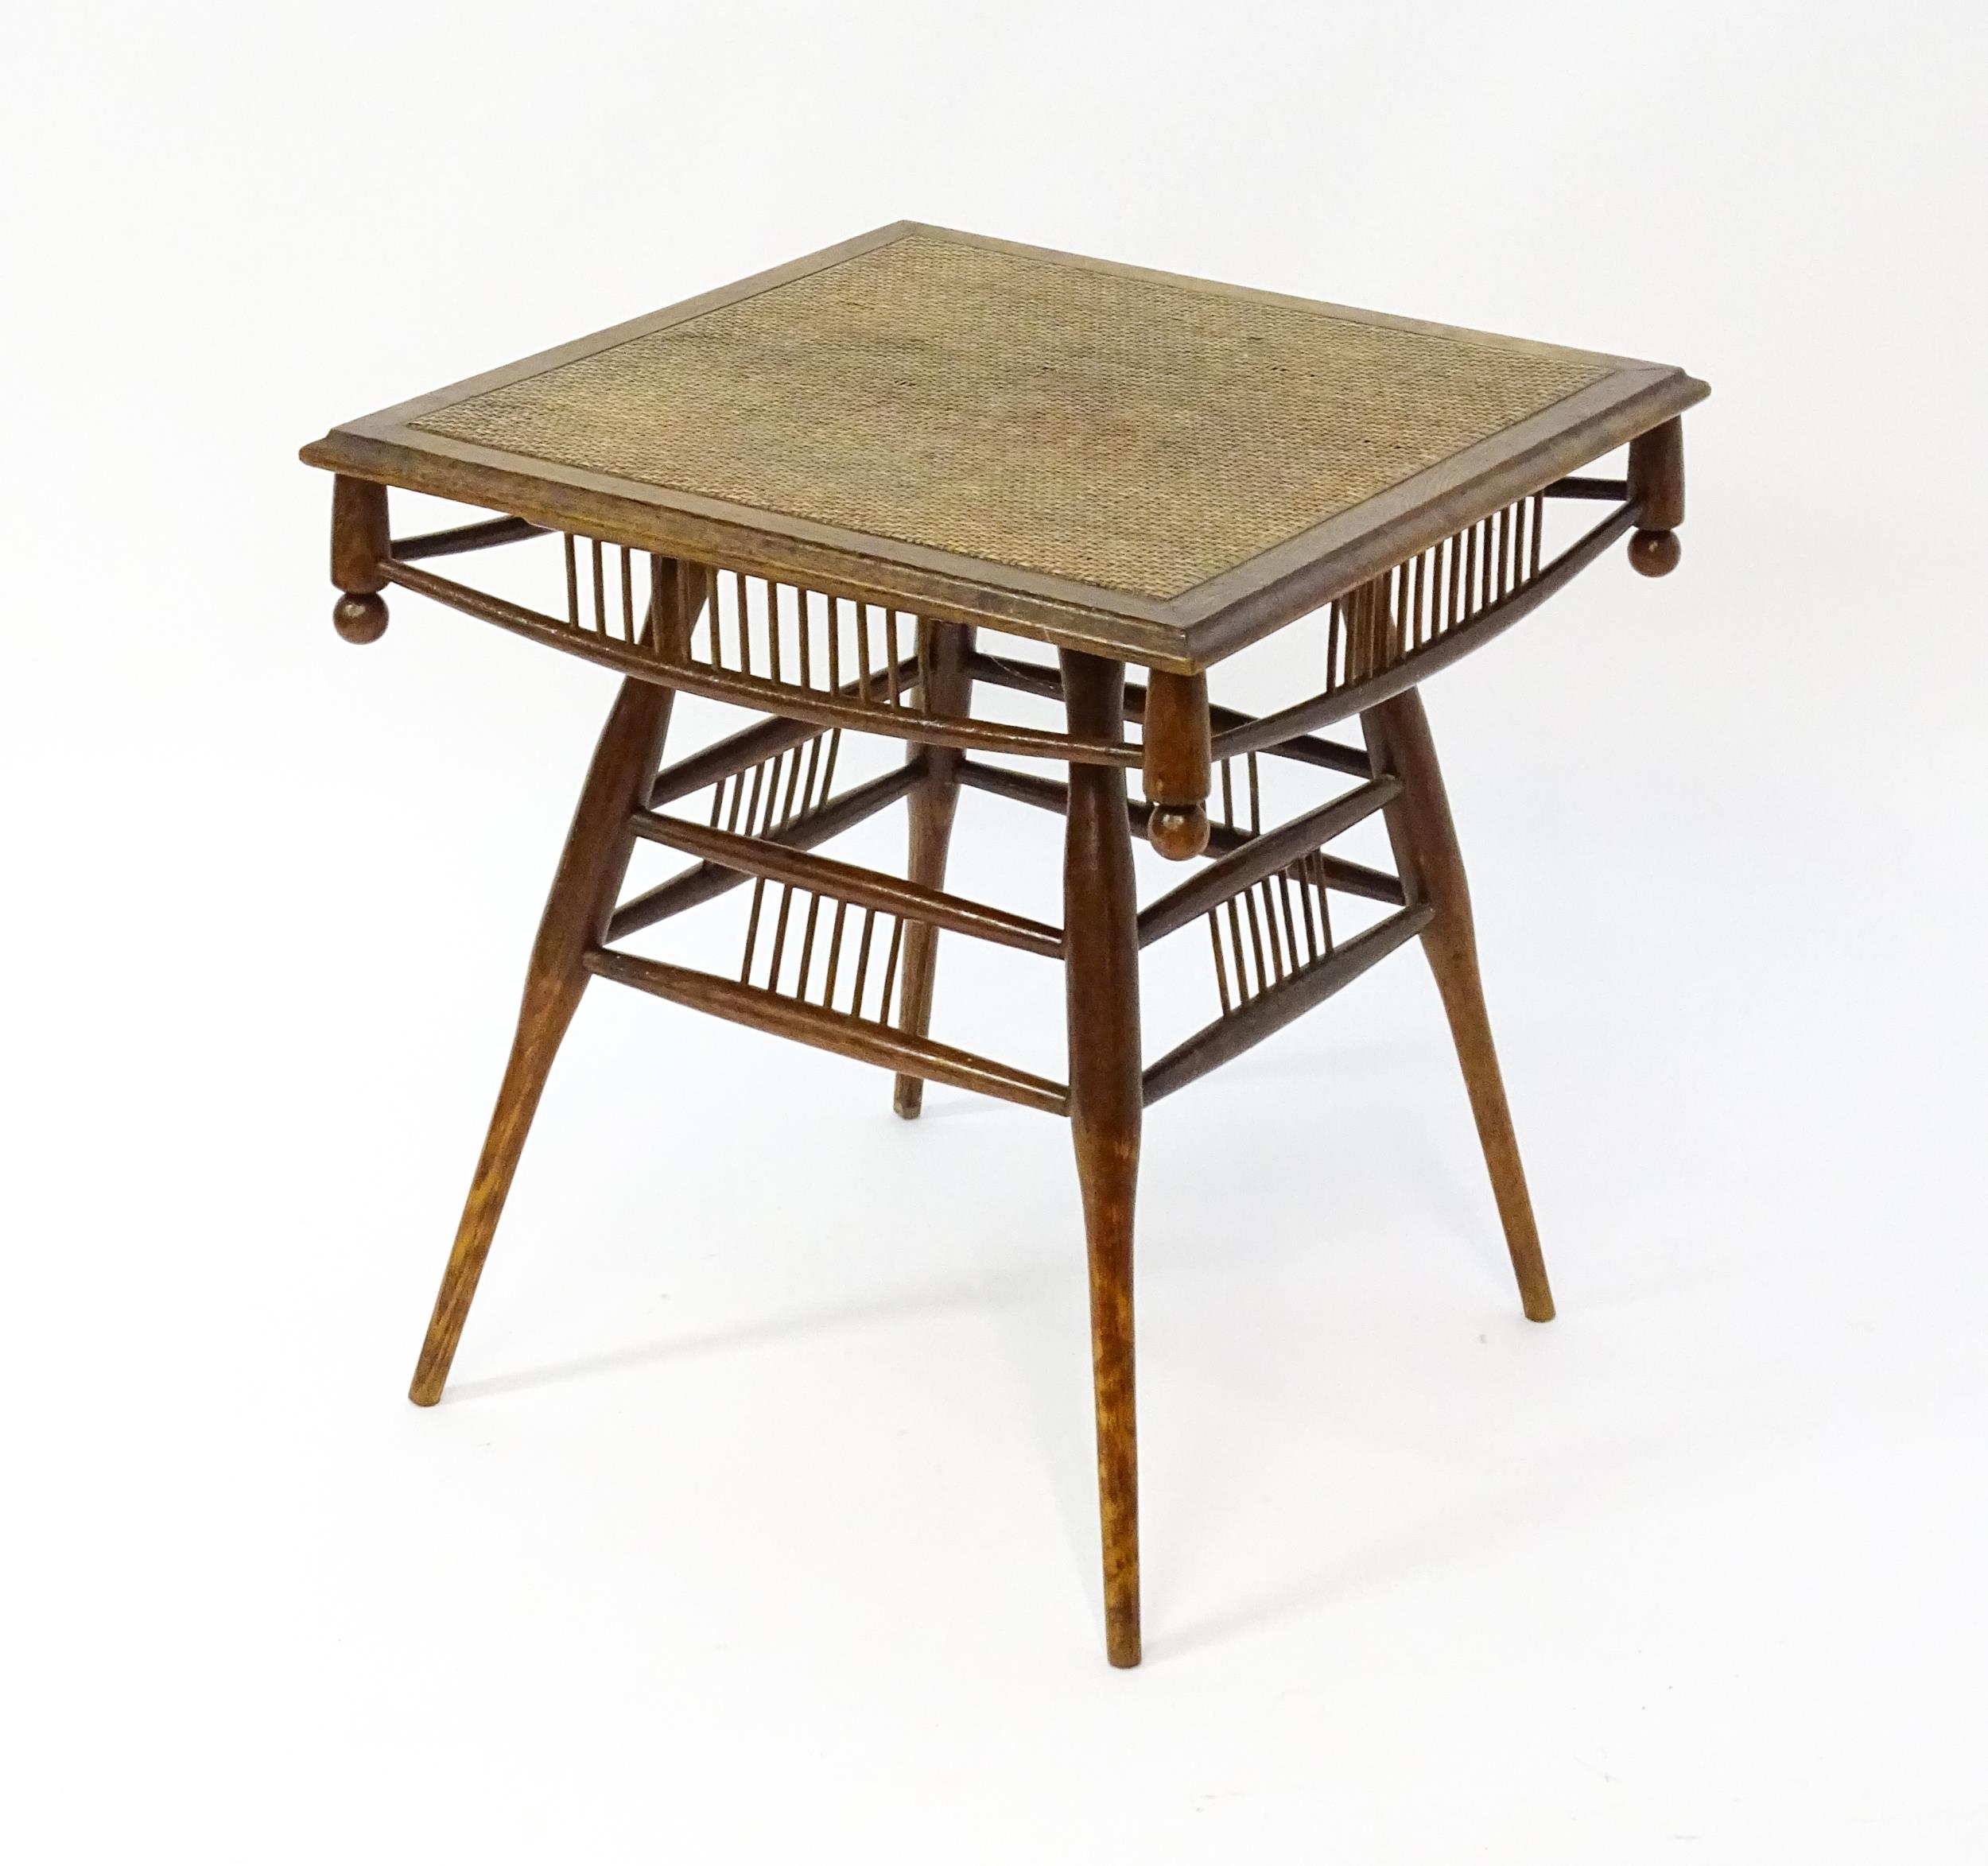 An unusual late 19thC Arts & Crafts table with a rattan inlaid moulded top above three tiers of - Image 7 of 10